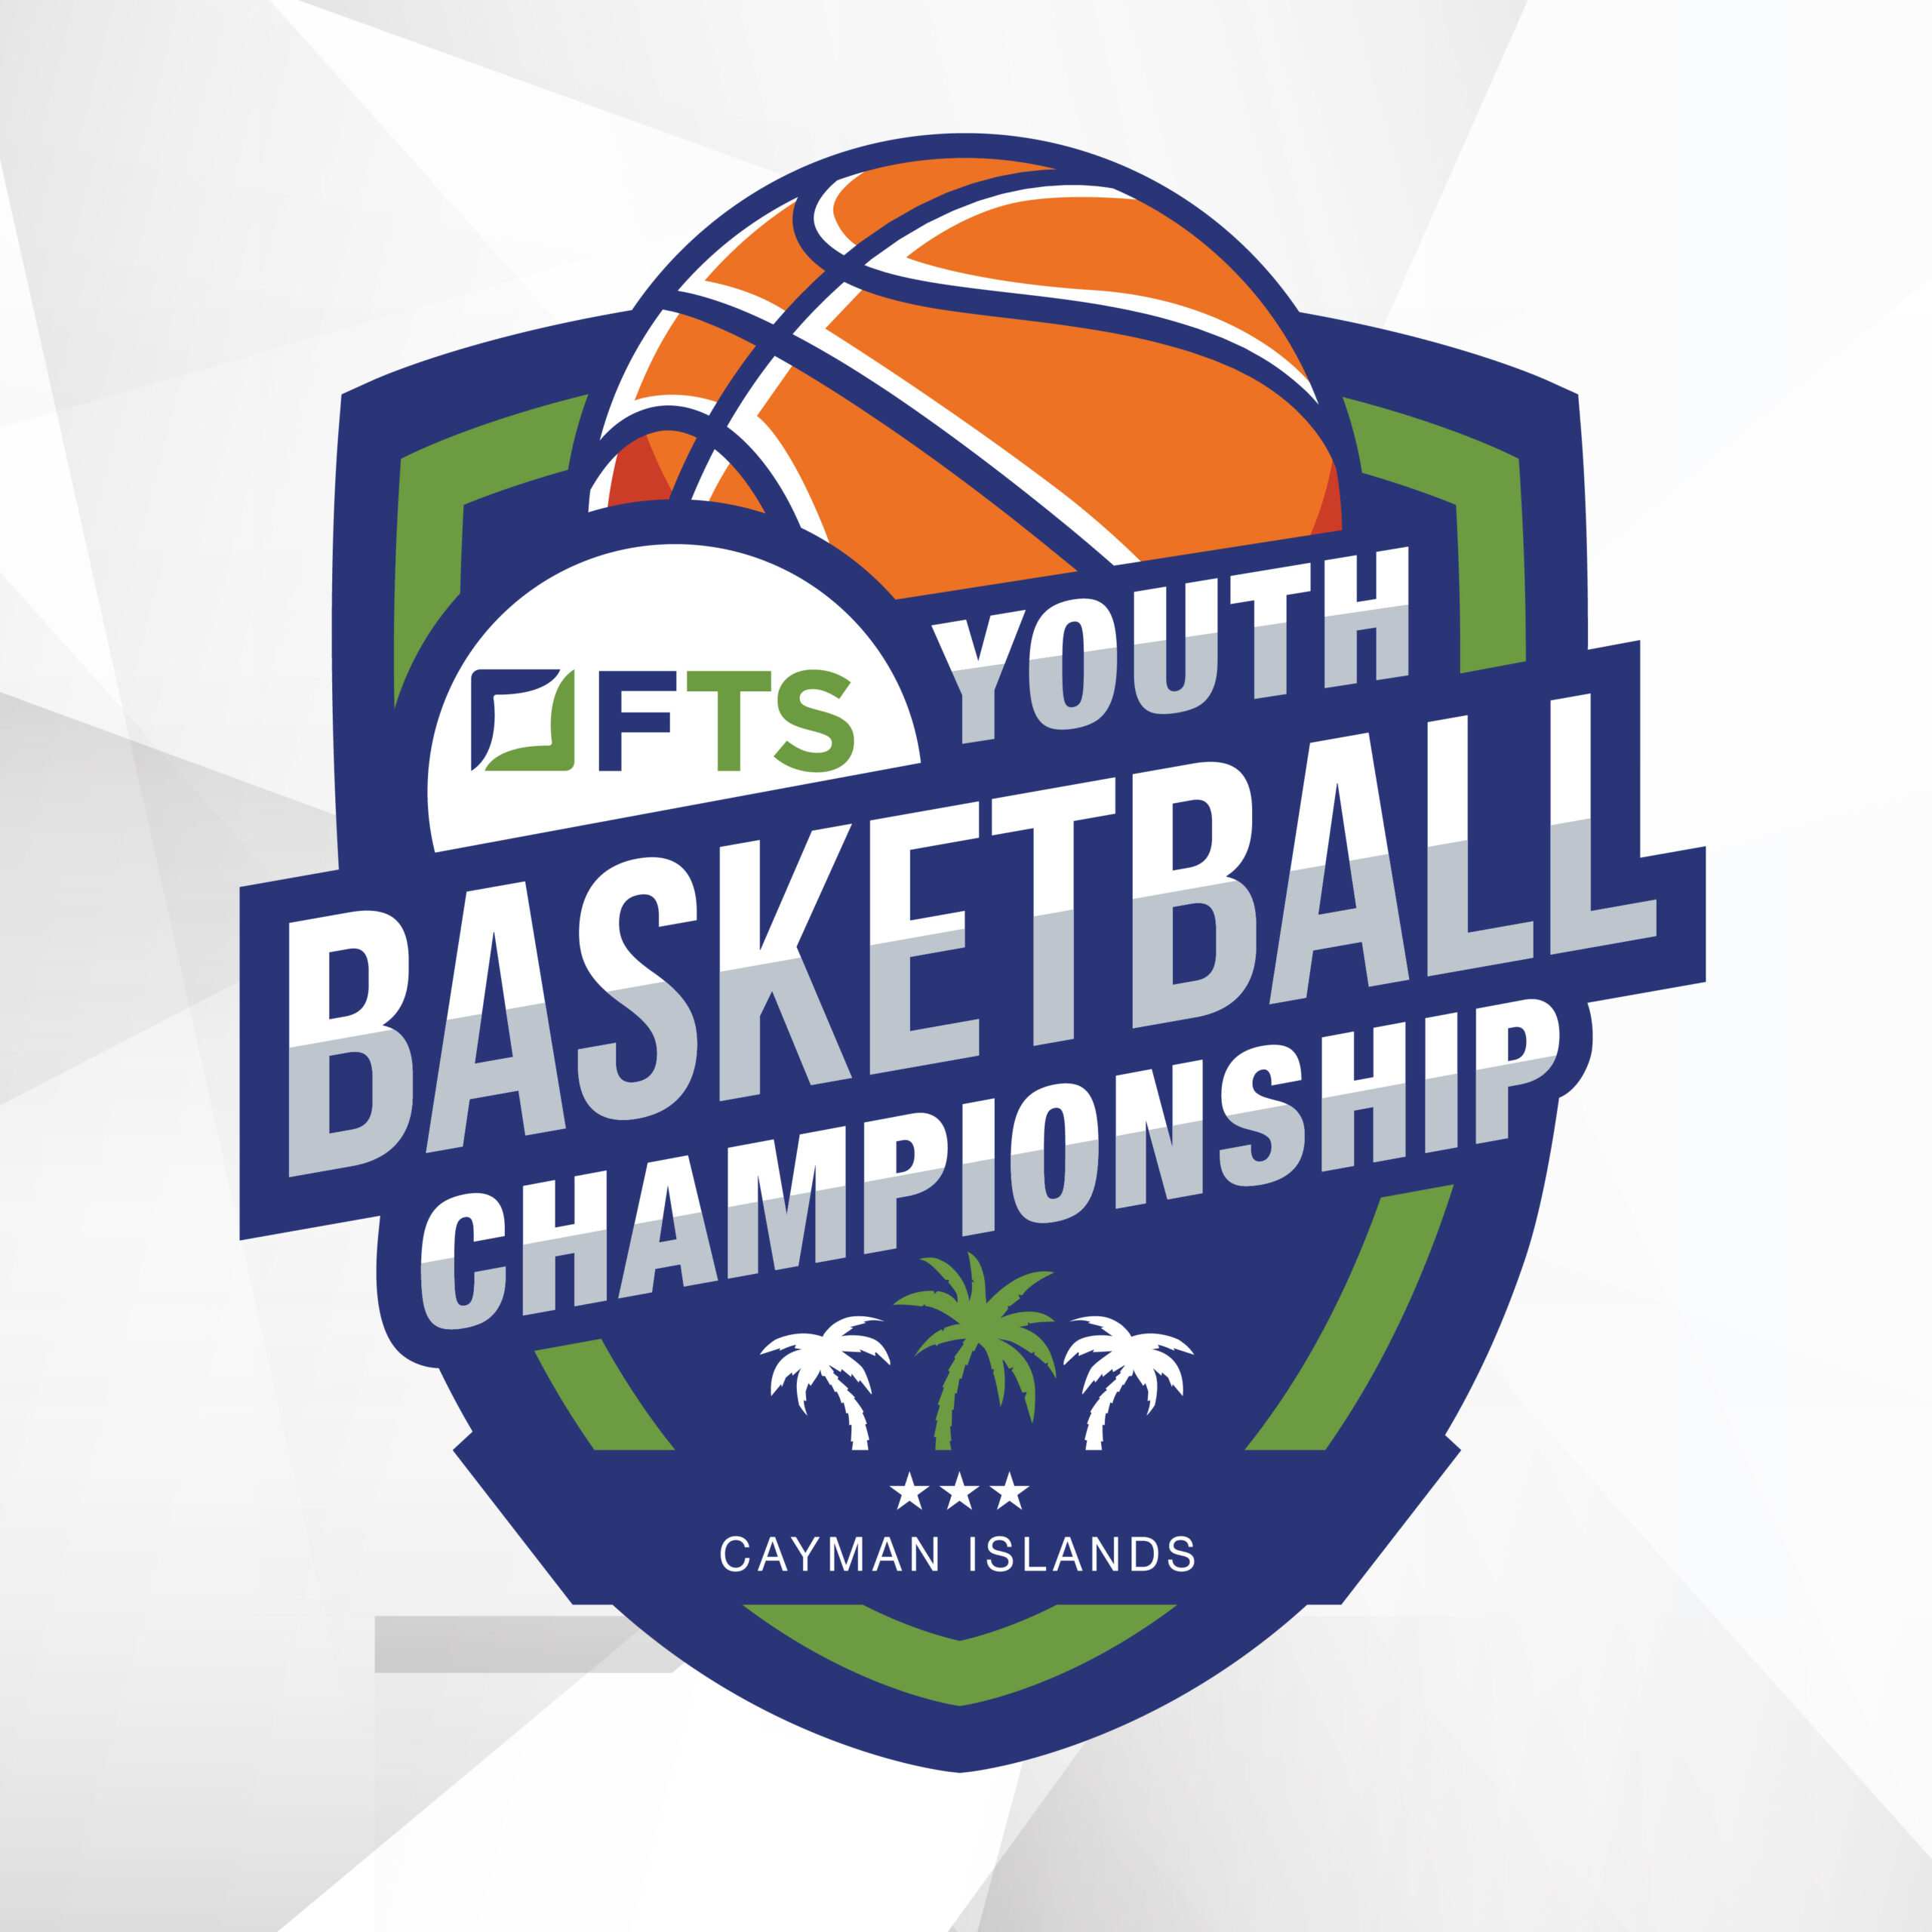 The Youth Basketball Championship kickoff event was a huge success